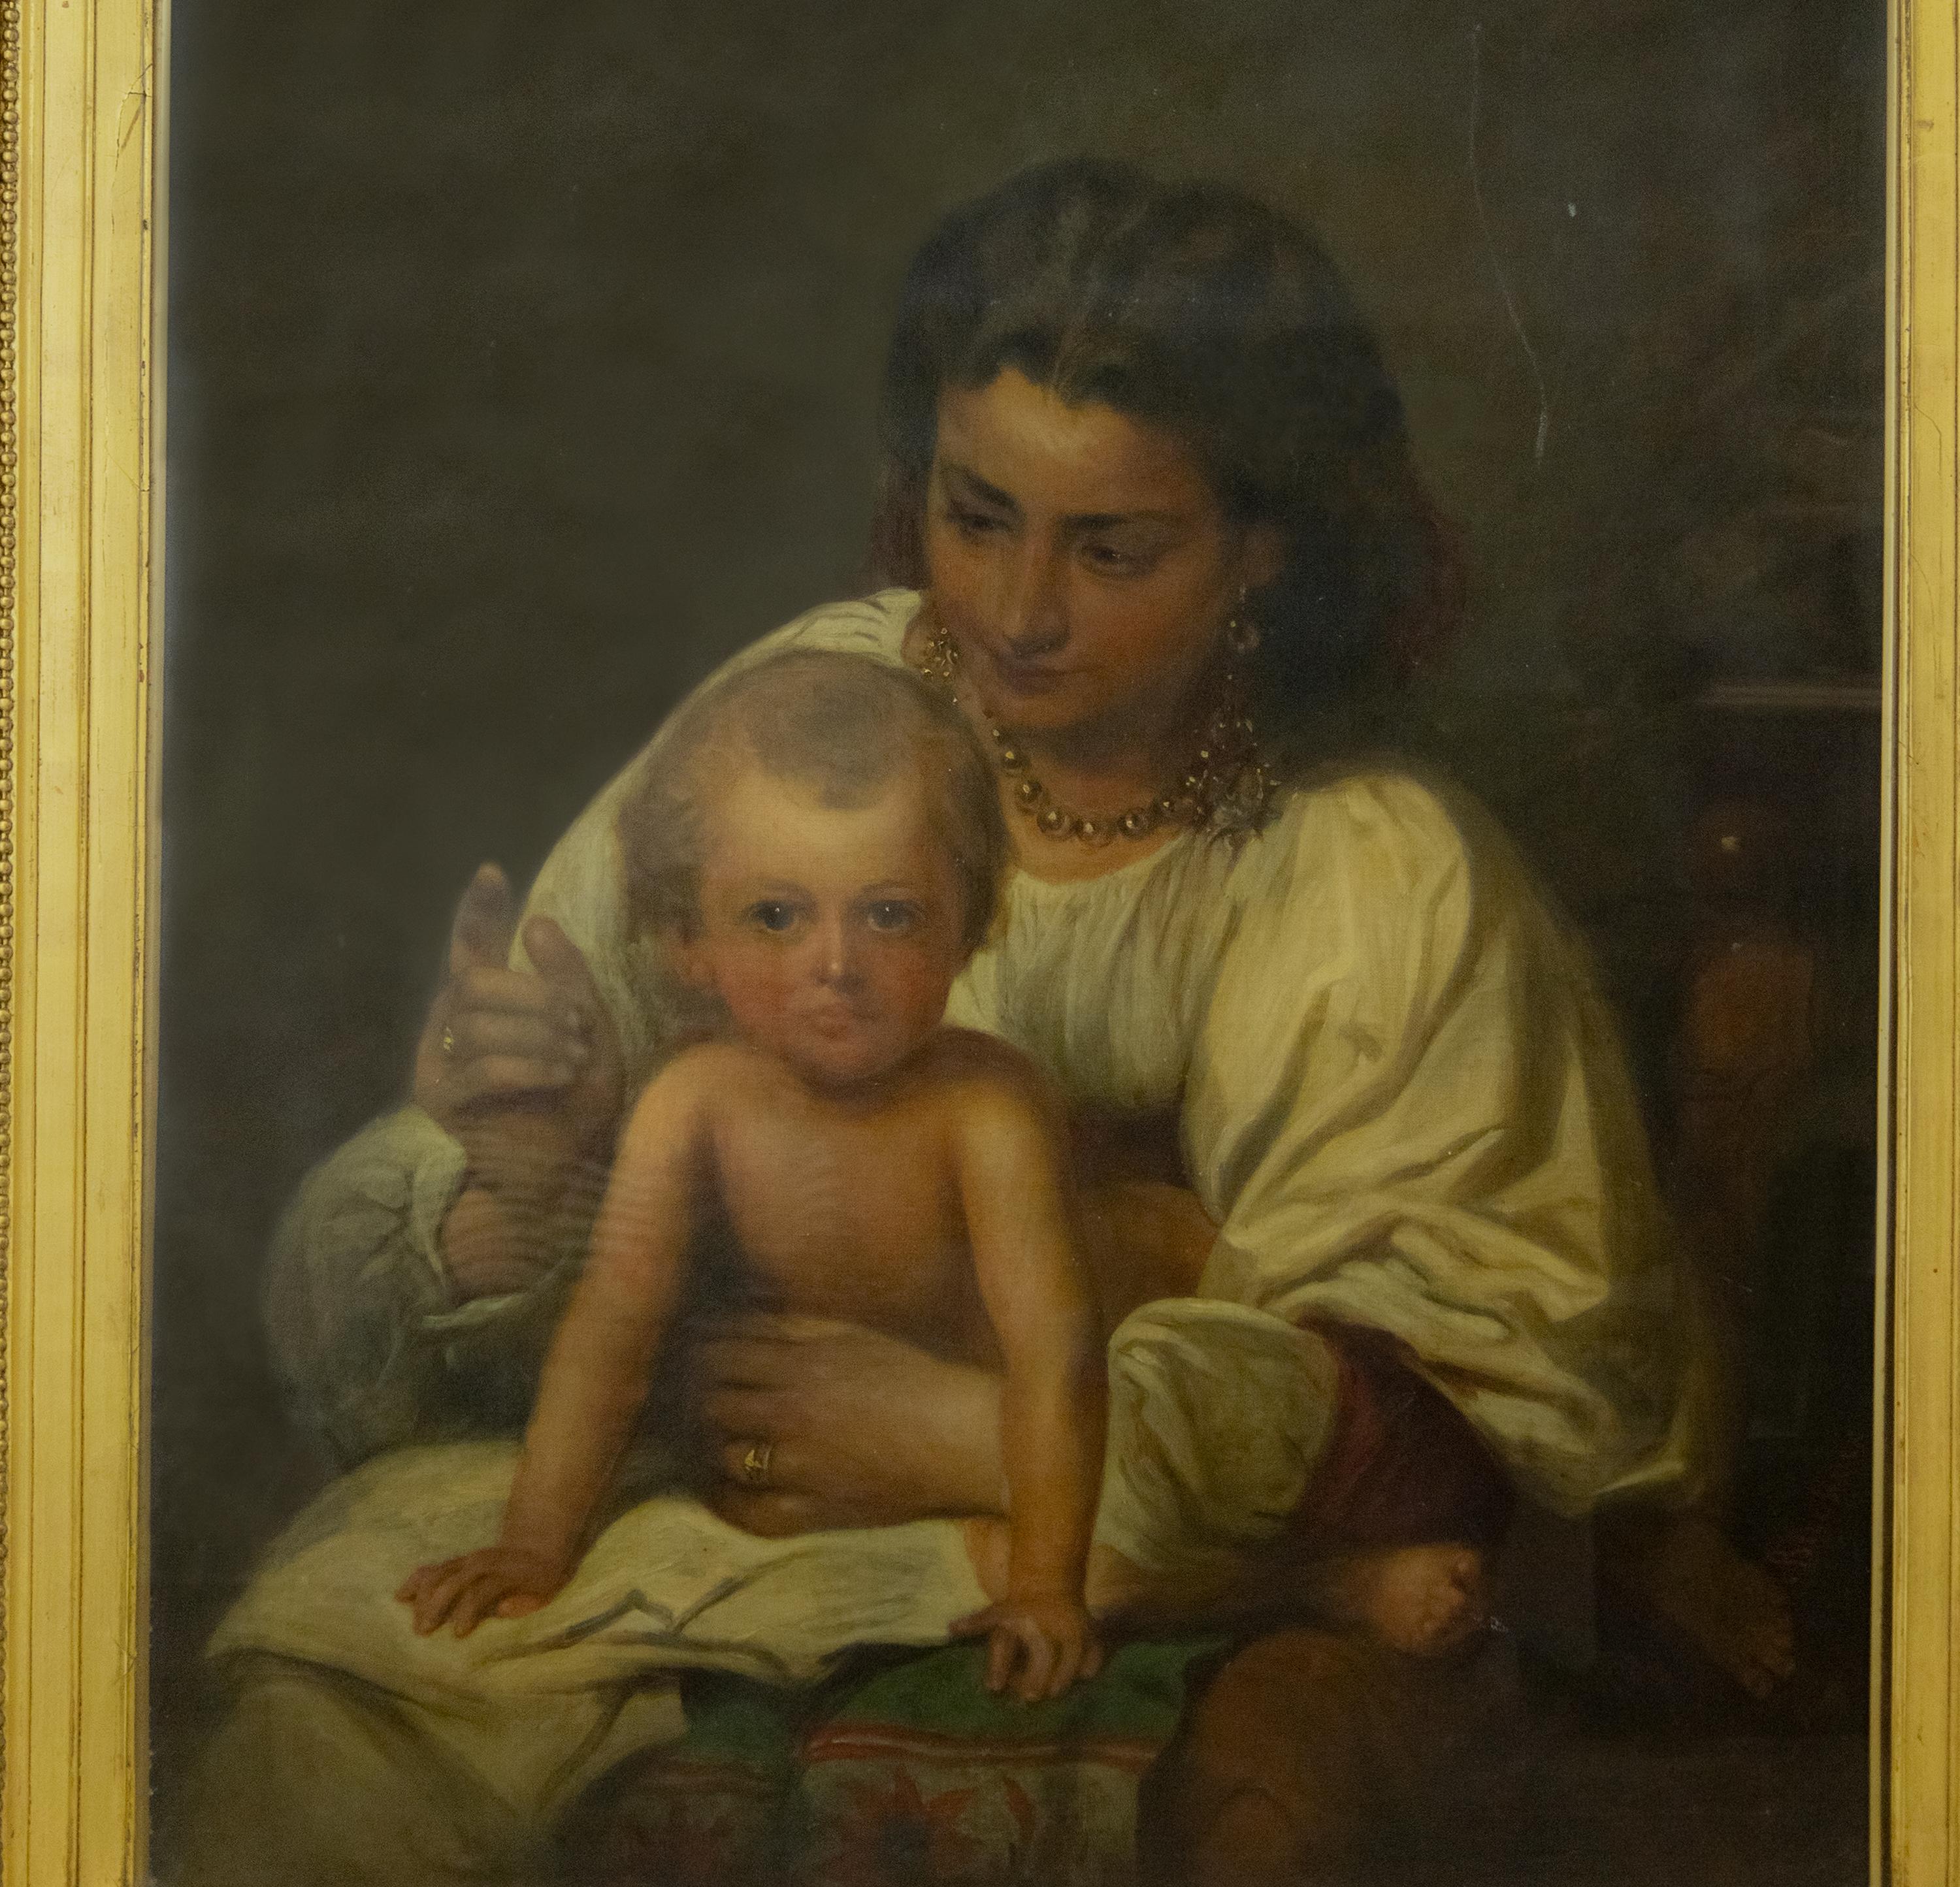 A fine painting by the English artist Richard Buckner (1812-1883) depicts a young mother holding a child.

Measures: H: 120 cm, W: 100 cm, D: 9 cm

Canvas: H: 92 cm, W: 72 cm, D: 2 cm.
 